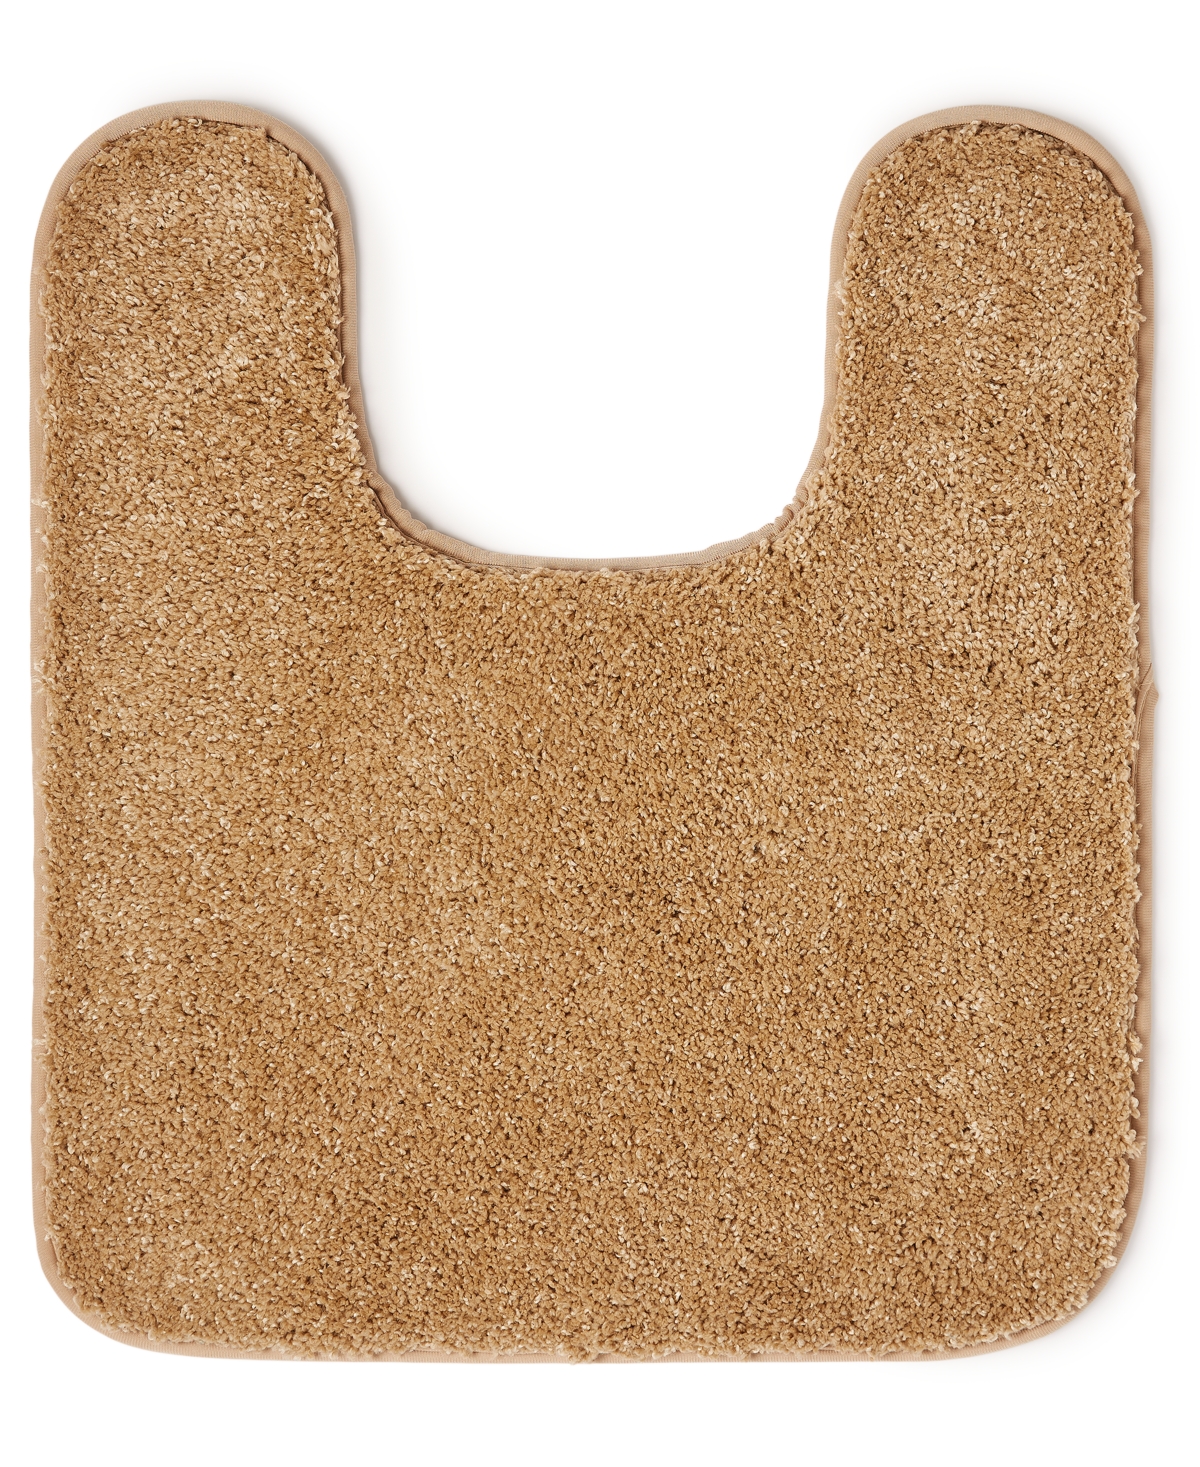 Charter Club Elite Contour Bath Rug, Created For Macy's In Camel